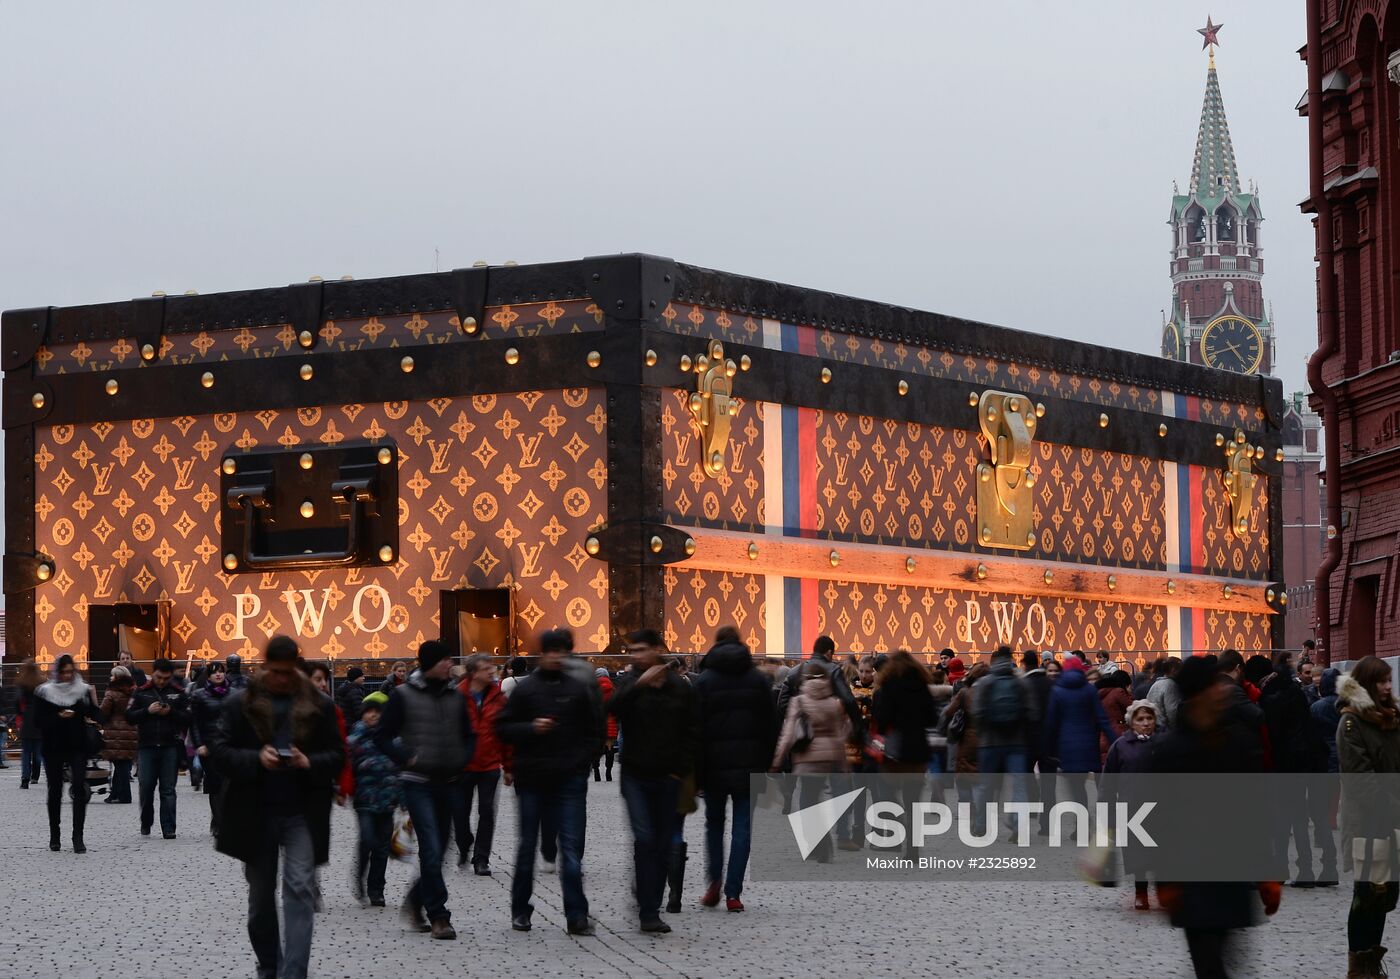 Pavilion shaped as Louis Vuitton bag on Red Square